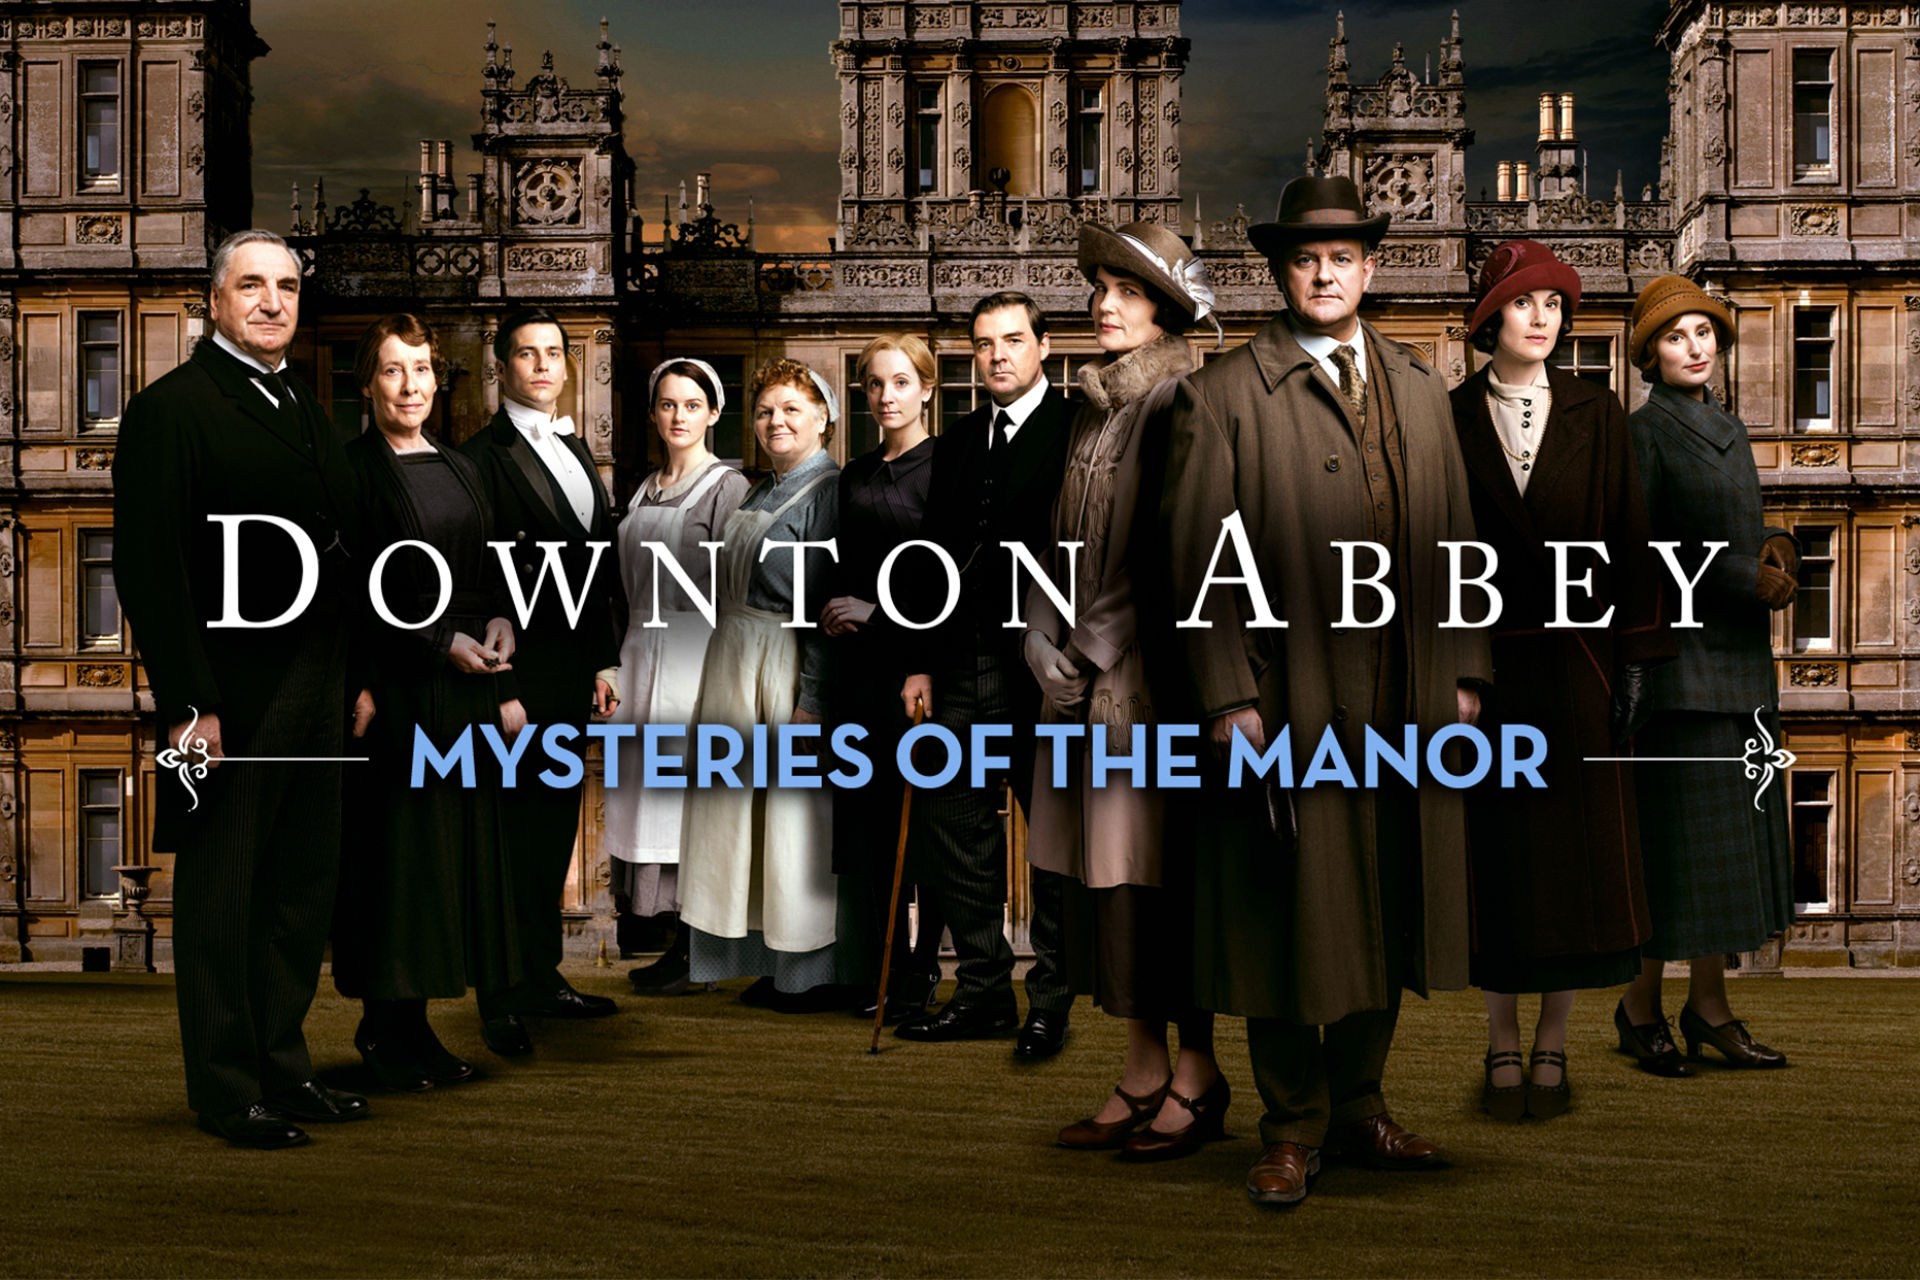 IM1415: Downton Abbey - Mysteries of the Manor